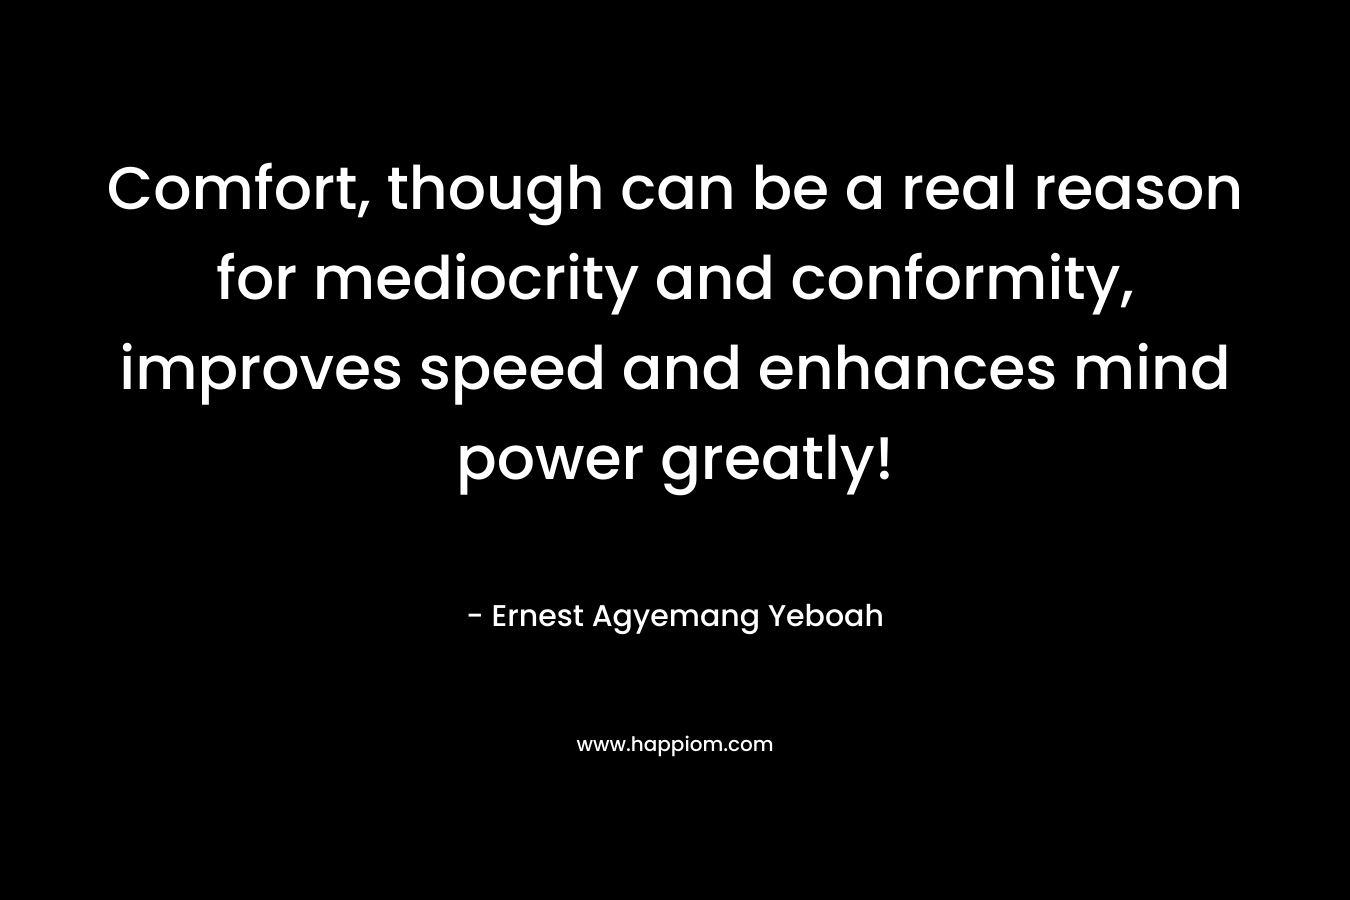 Comfort, though can be a real reason for mediocrity and conformity, improves speed and enhances mind power greatly!